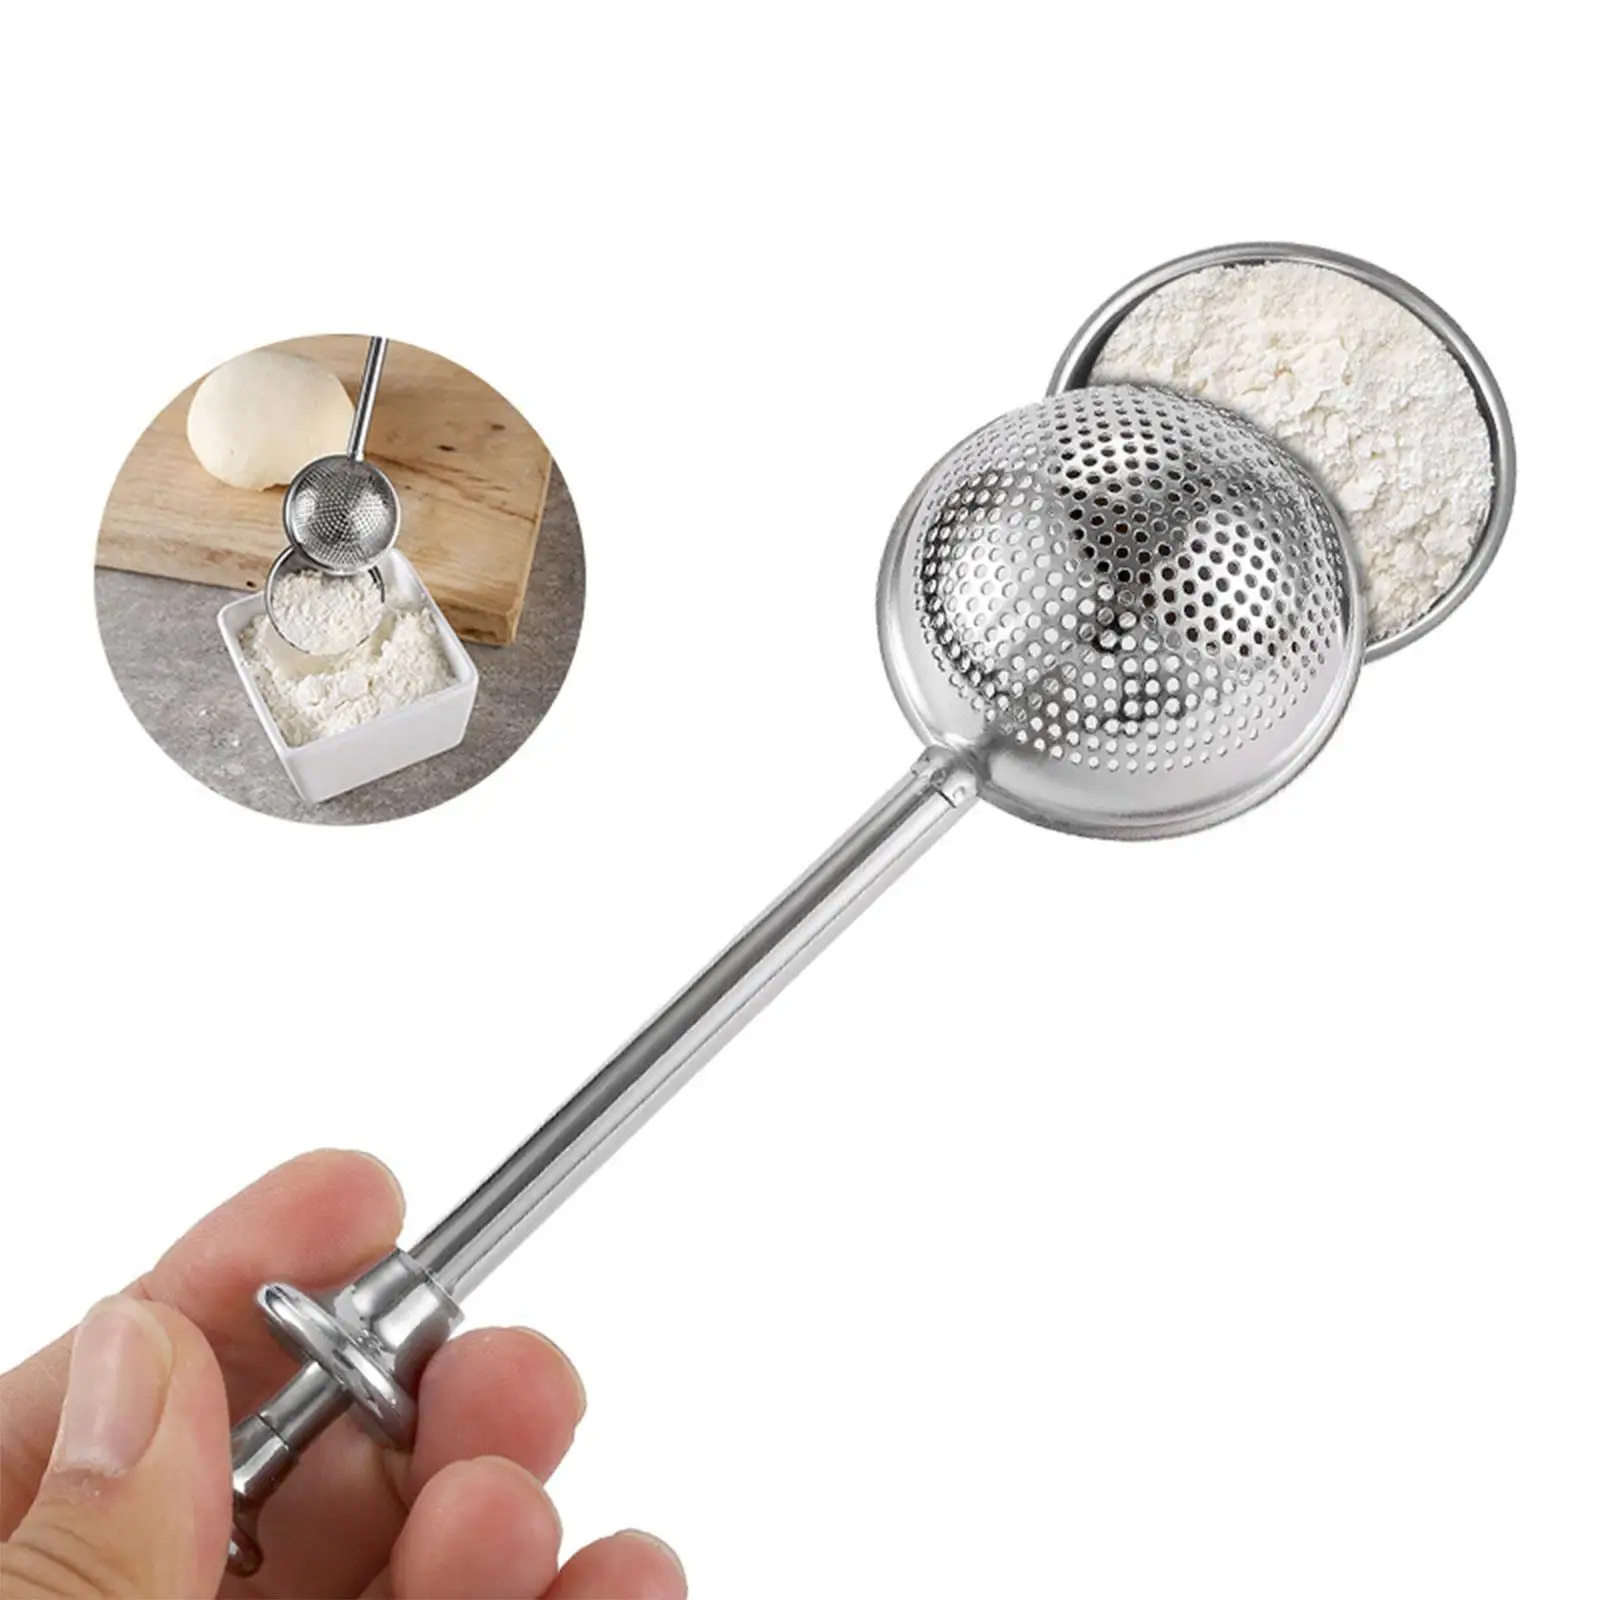 Stainless Steel Flour Sifter Dishwasher Safe Manual Telescopic Powder Spreader Sugar Duster for Pastry Cake Decor Tool